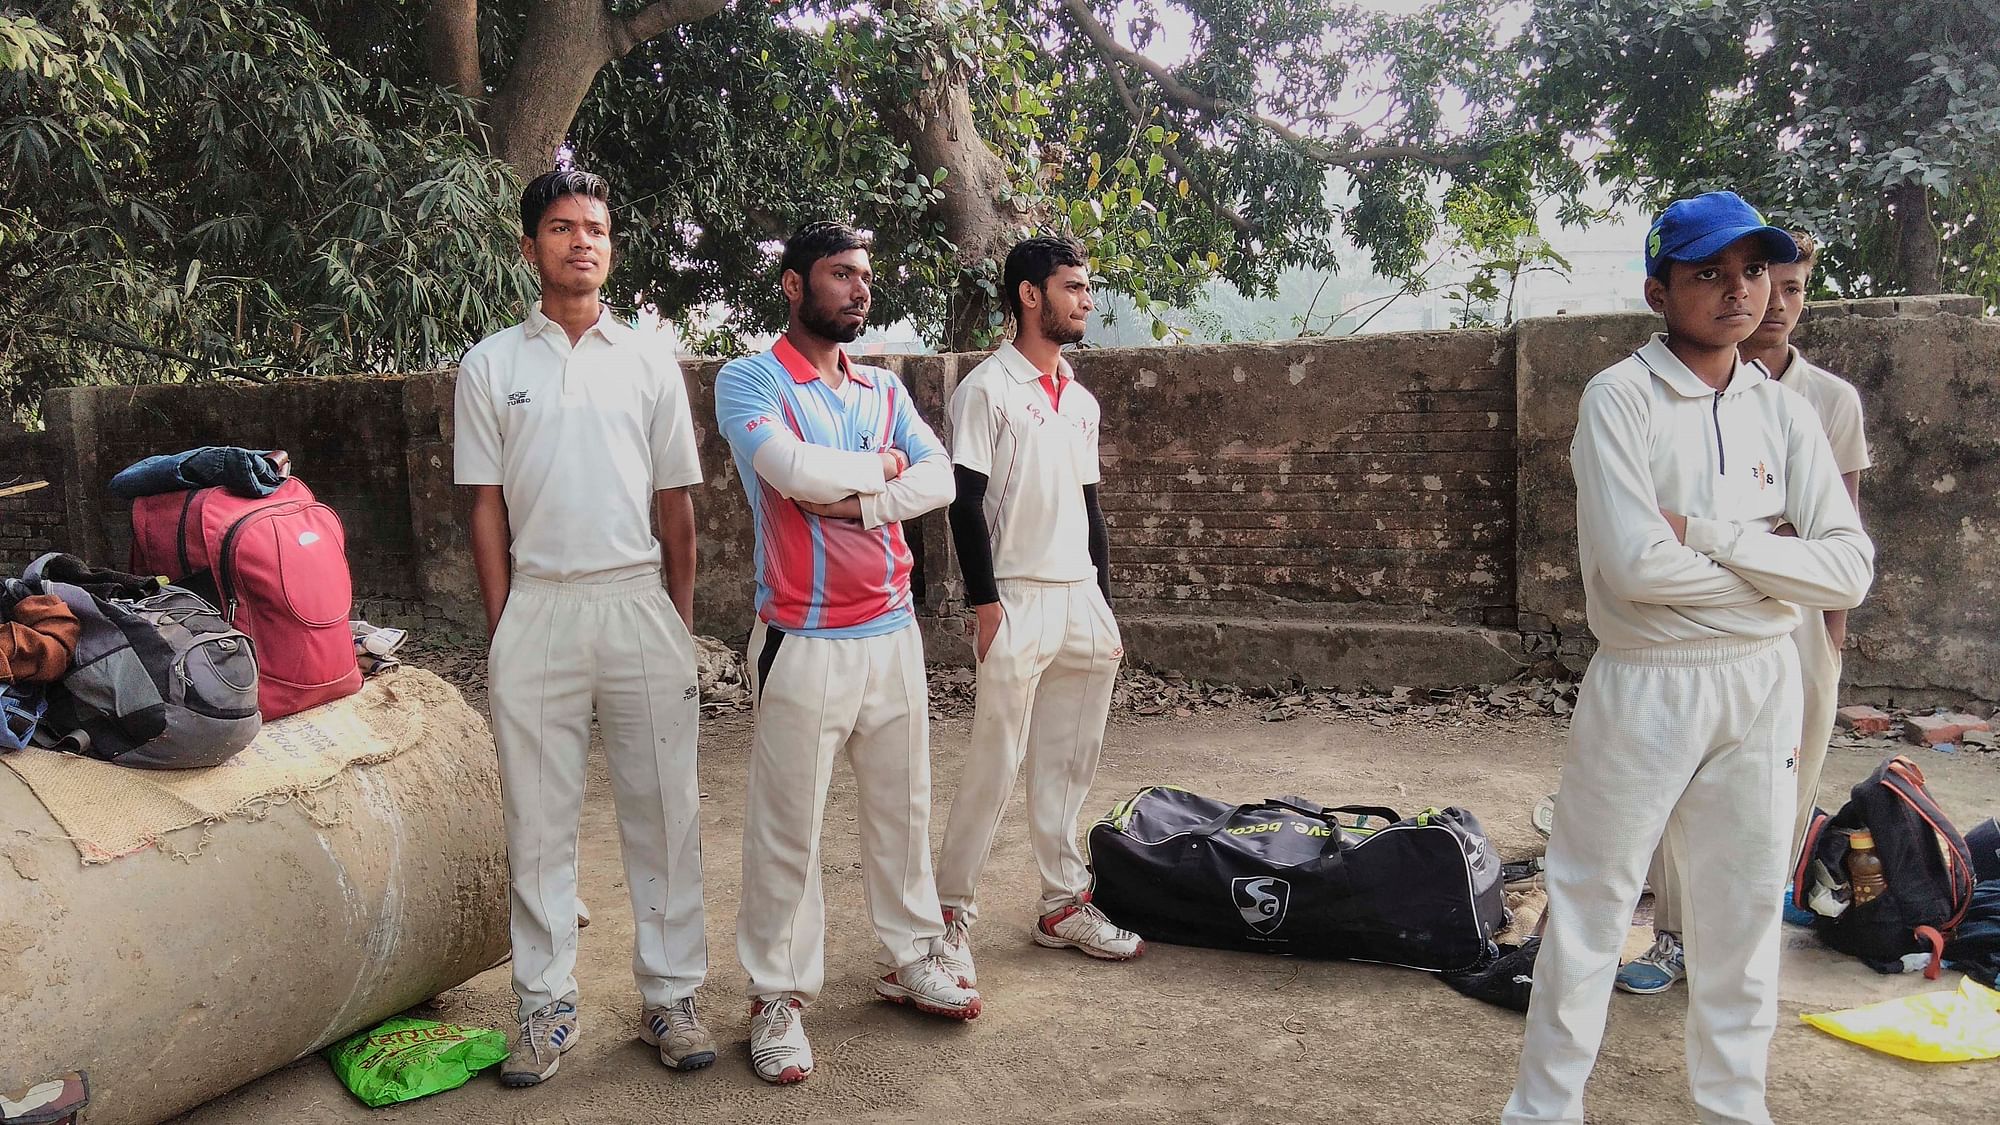 Over the past 17 years, Bihar has been devoid of any opportunity of developing cricket in the state.